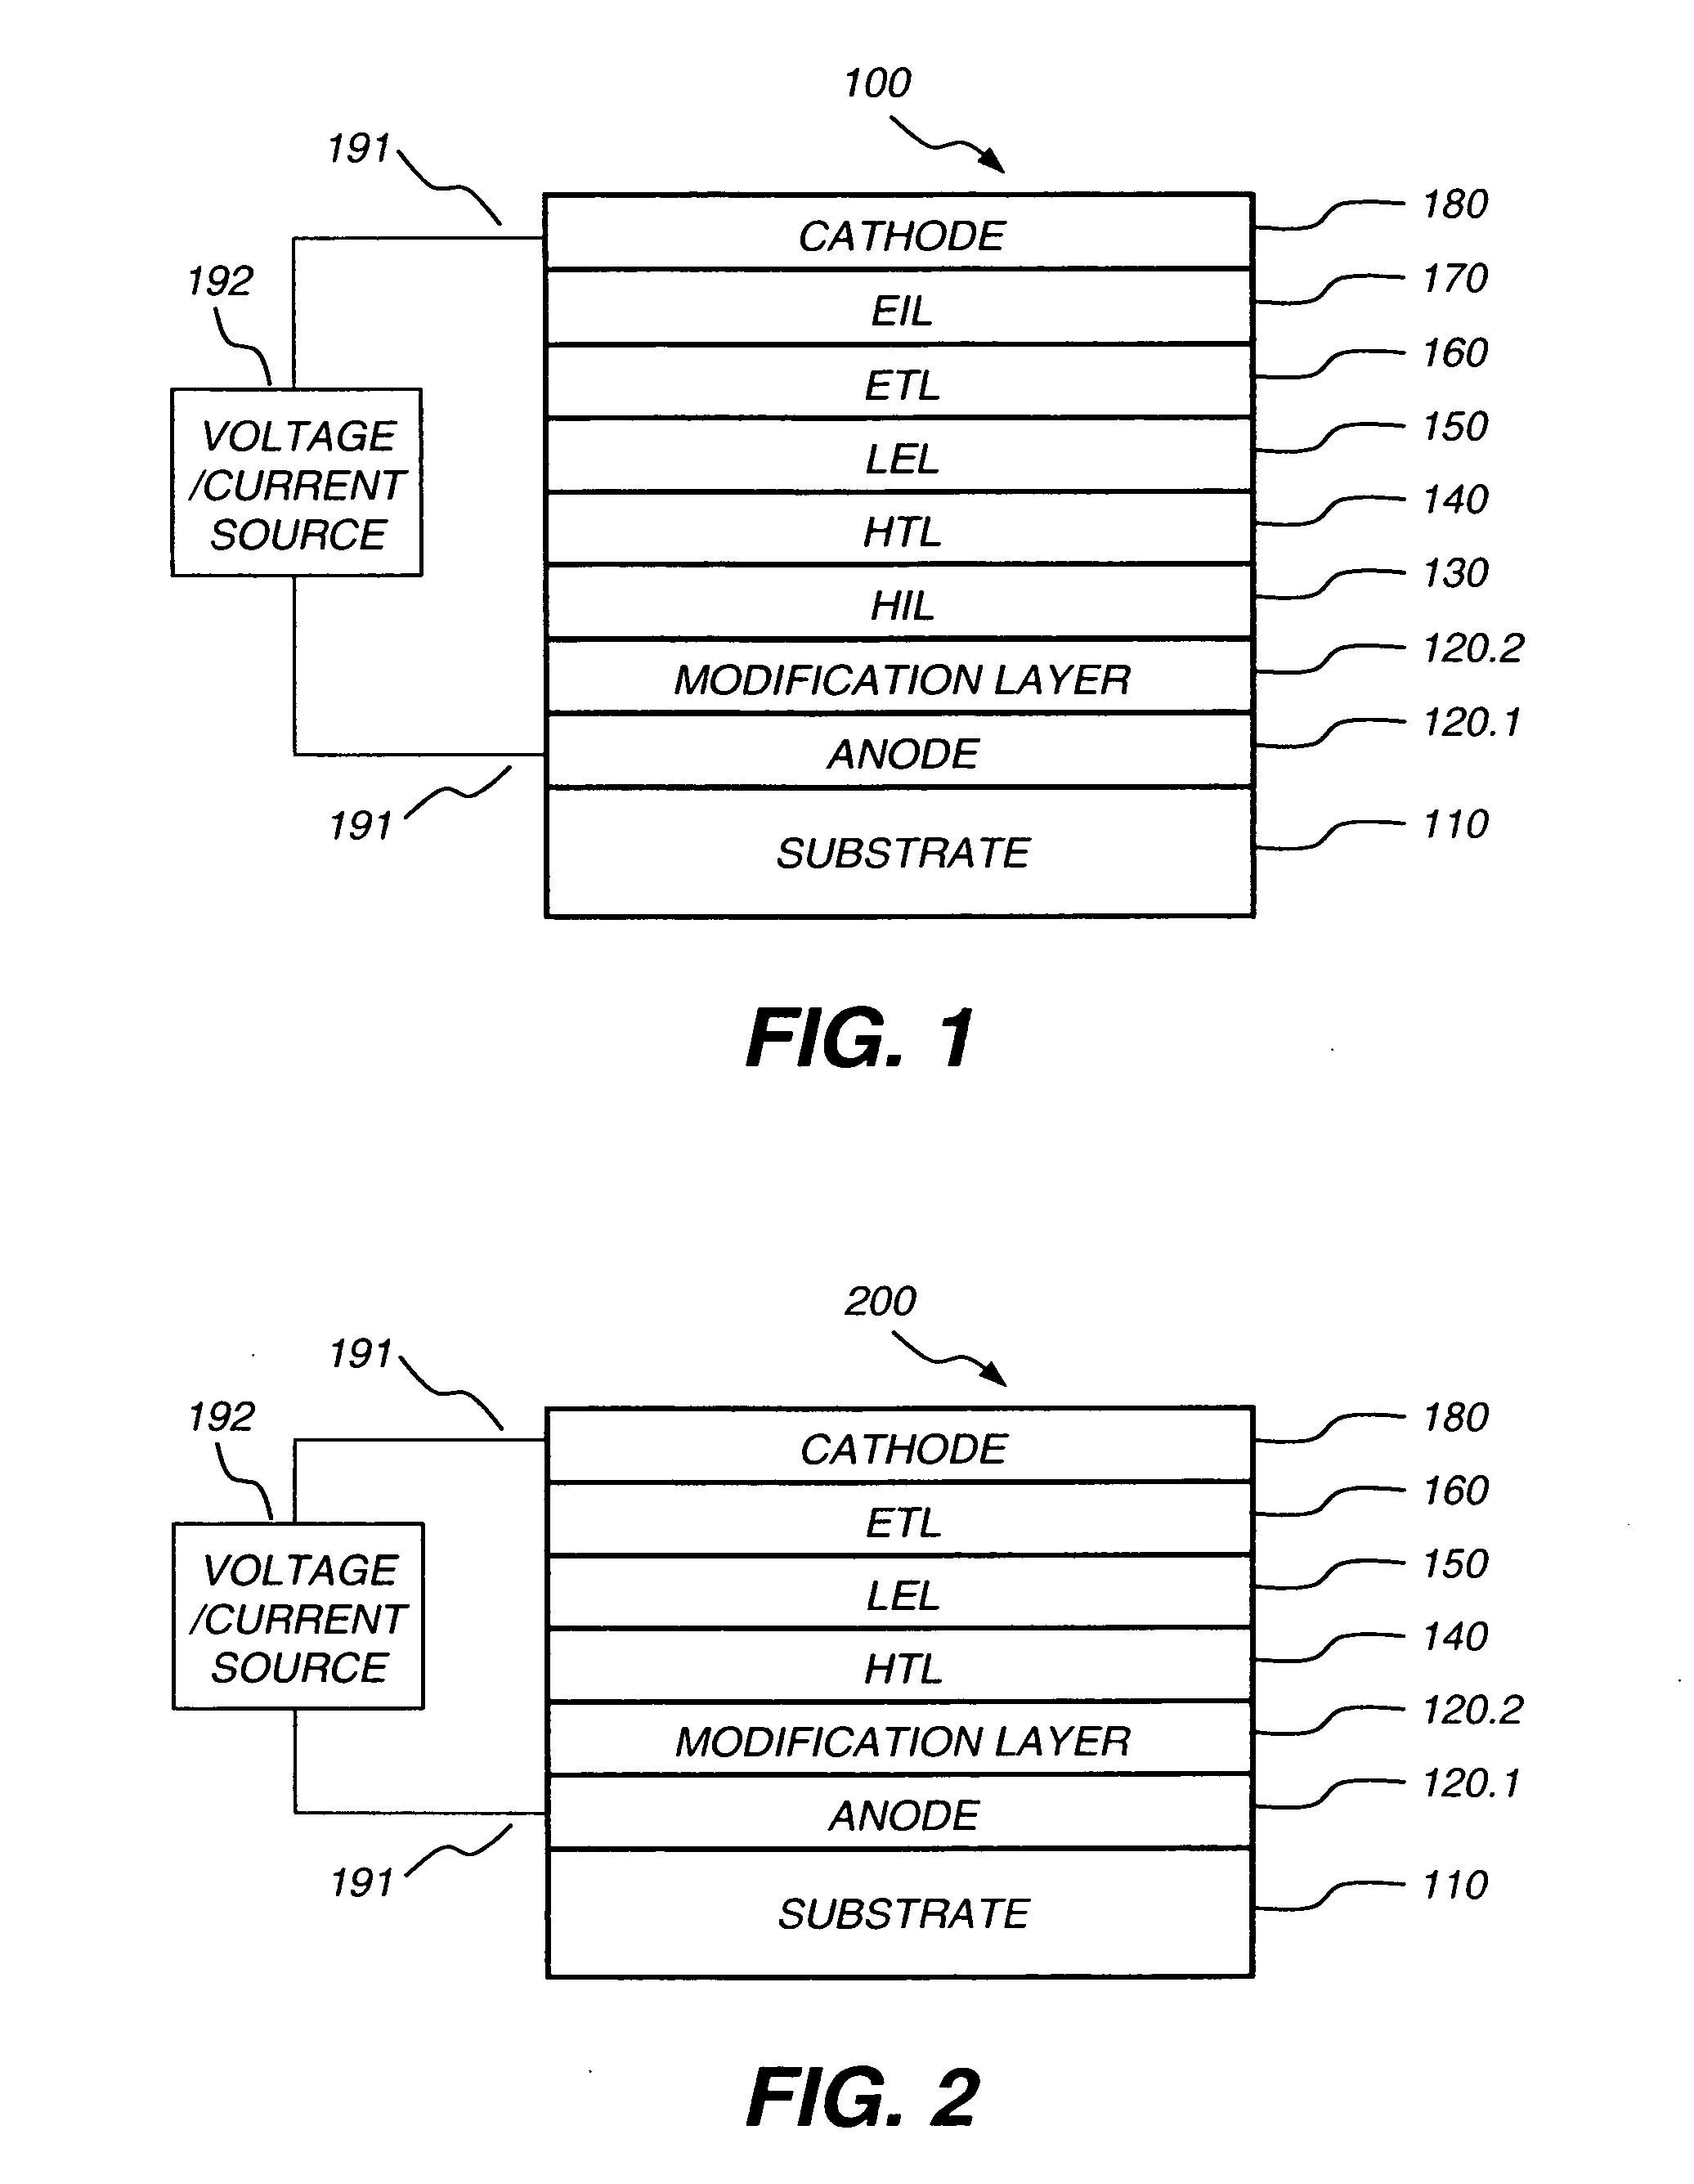 Fluorocarbon electrode modification layer